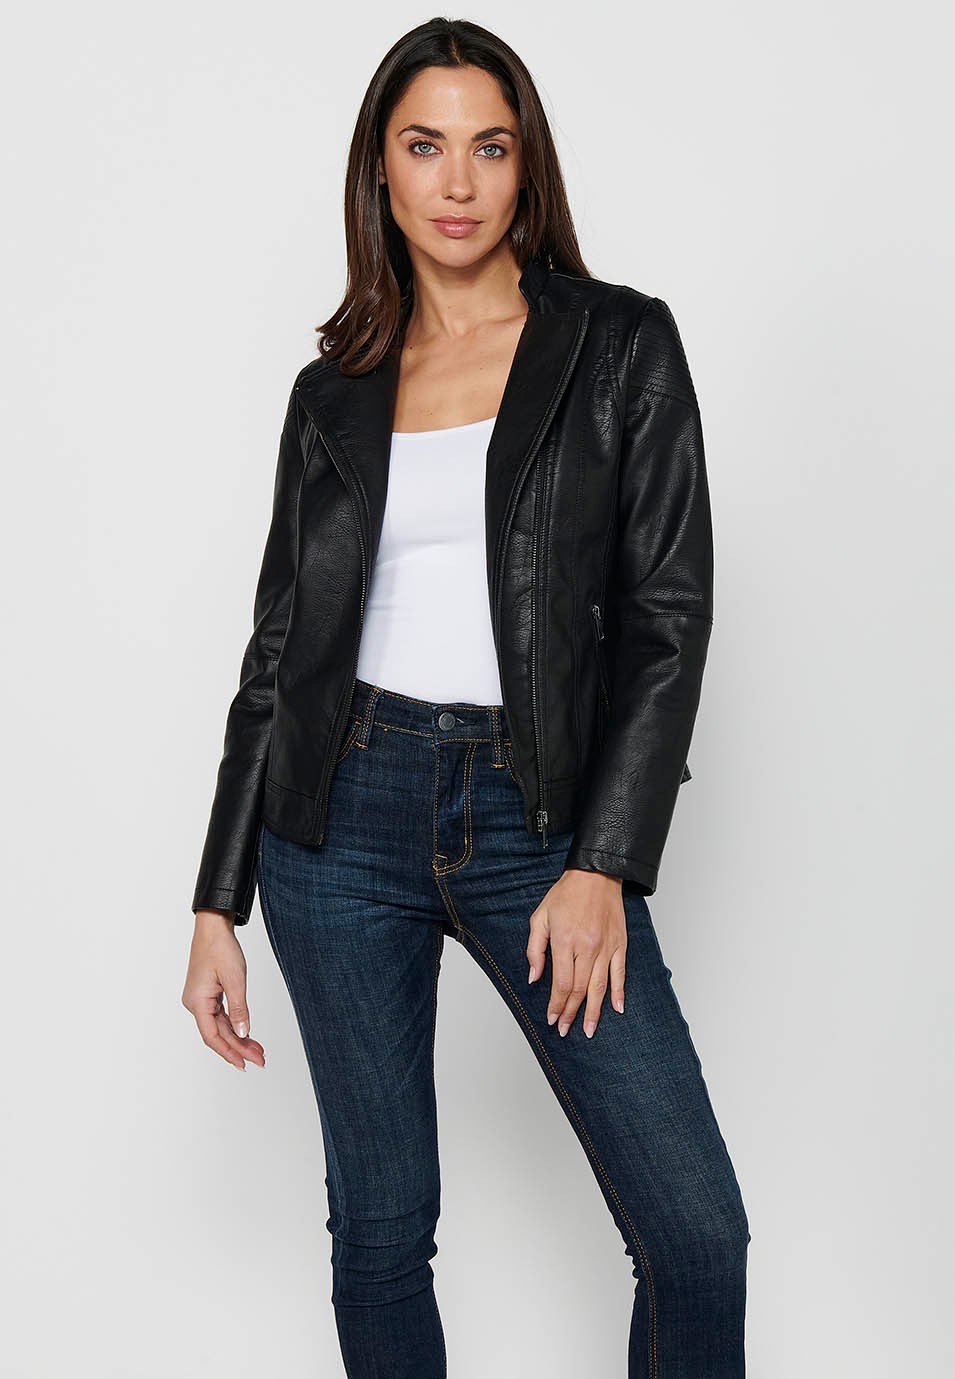 Long-sleeved high-neck jacket with front zipper closure and details on the shoulders with front pockets in Black for Women